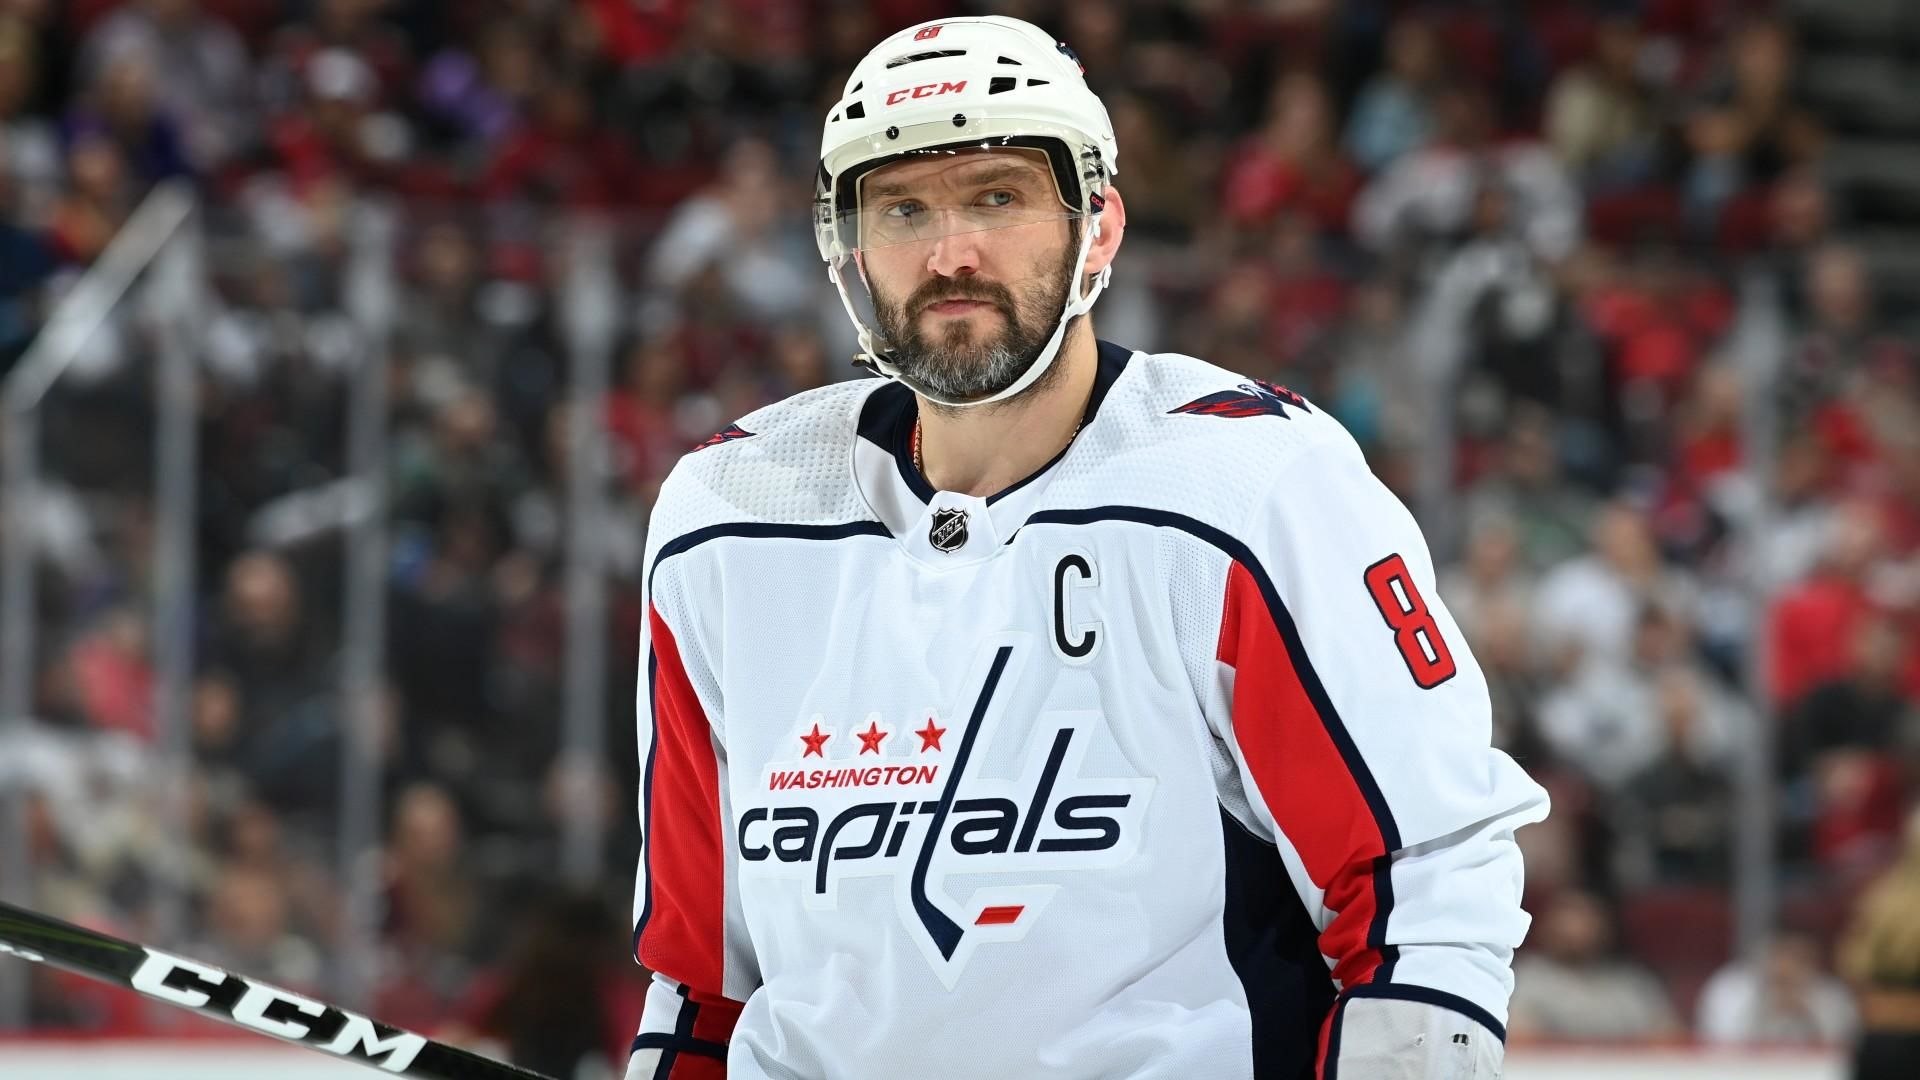 Ovechkin on the shootout with his son and Crosby: Doing it with Sid was a special moment